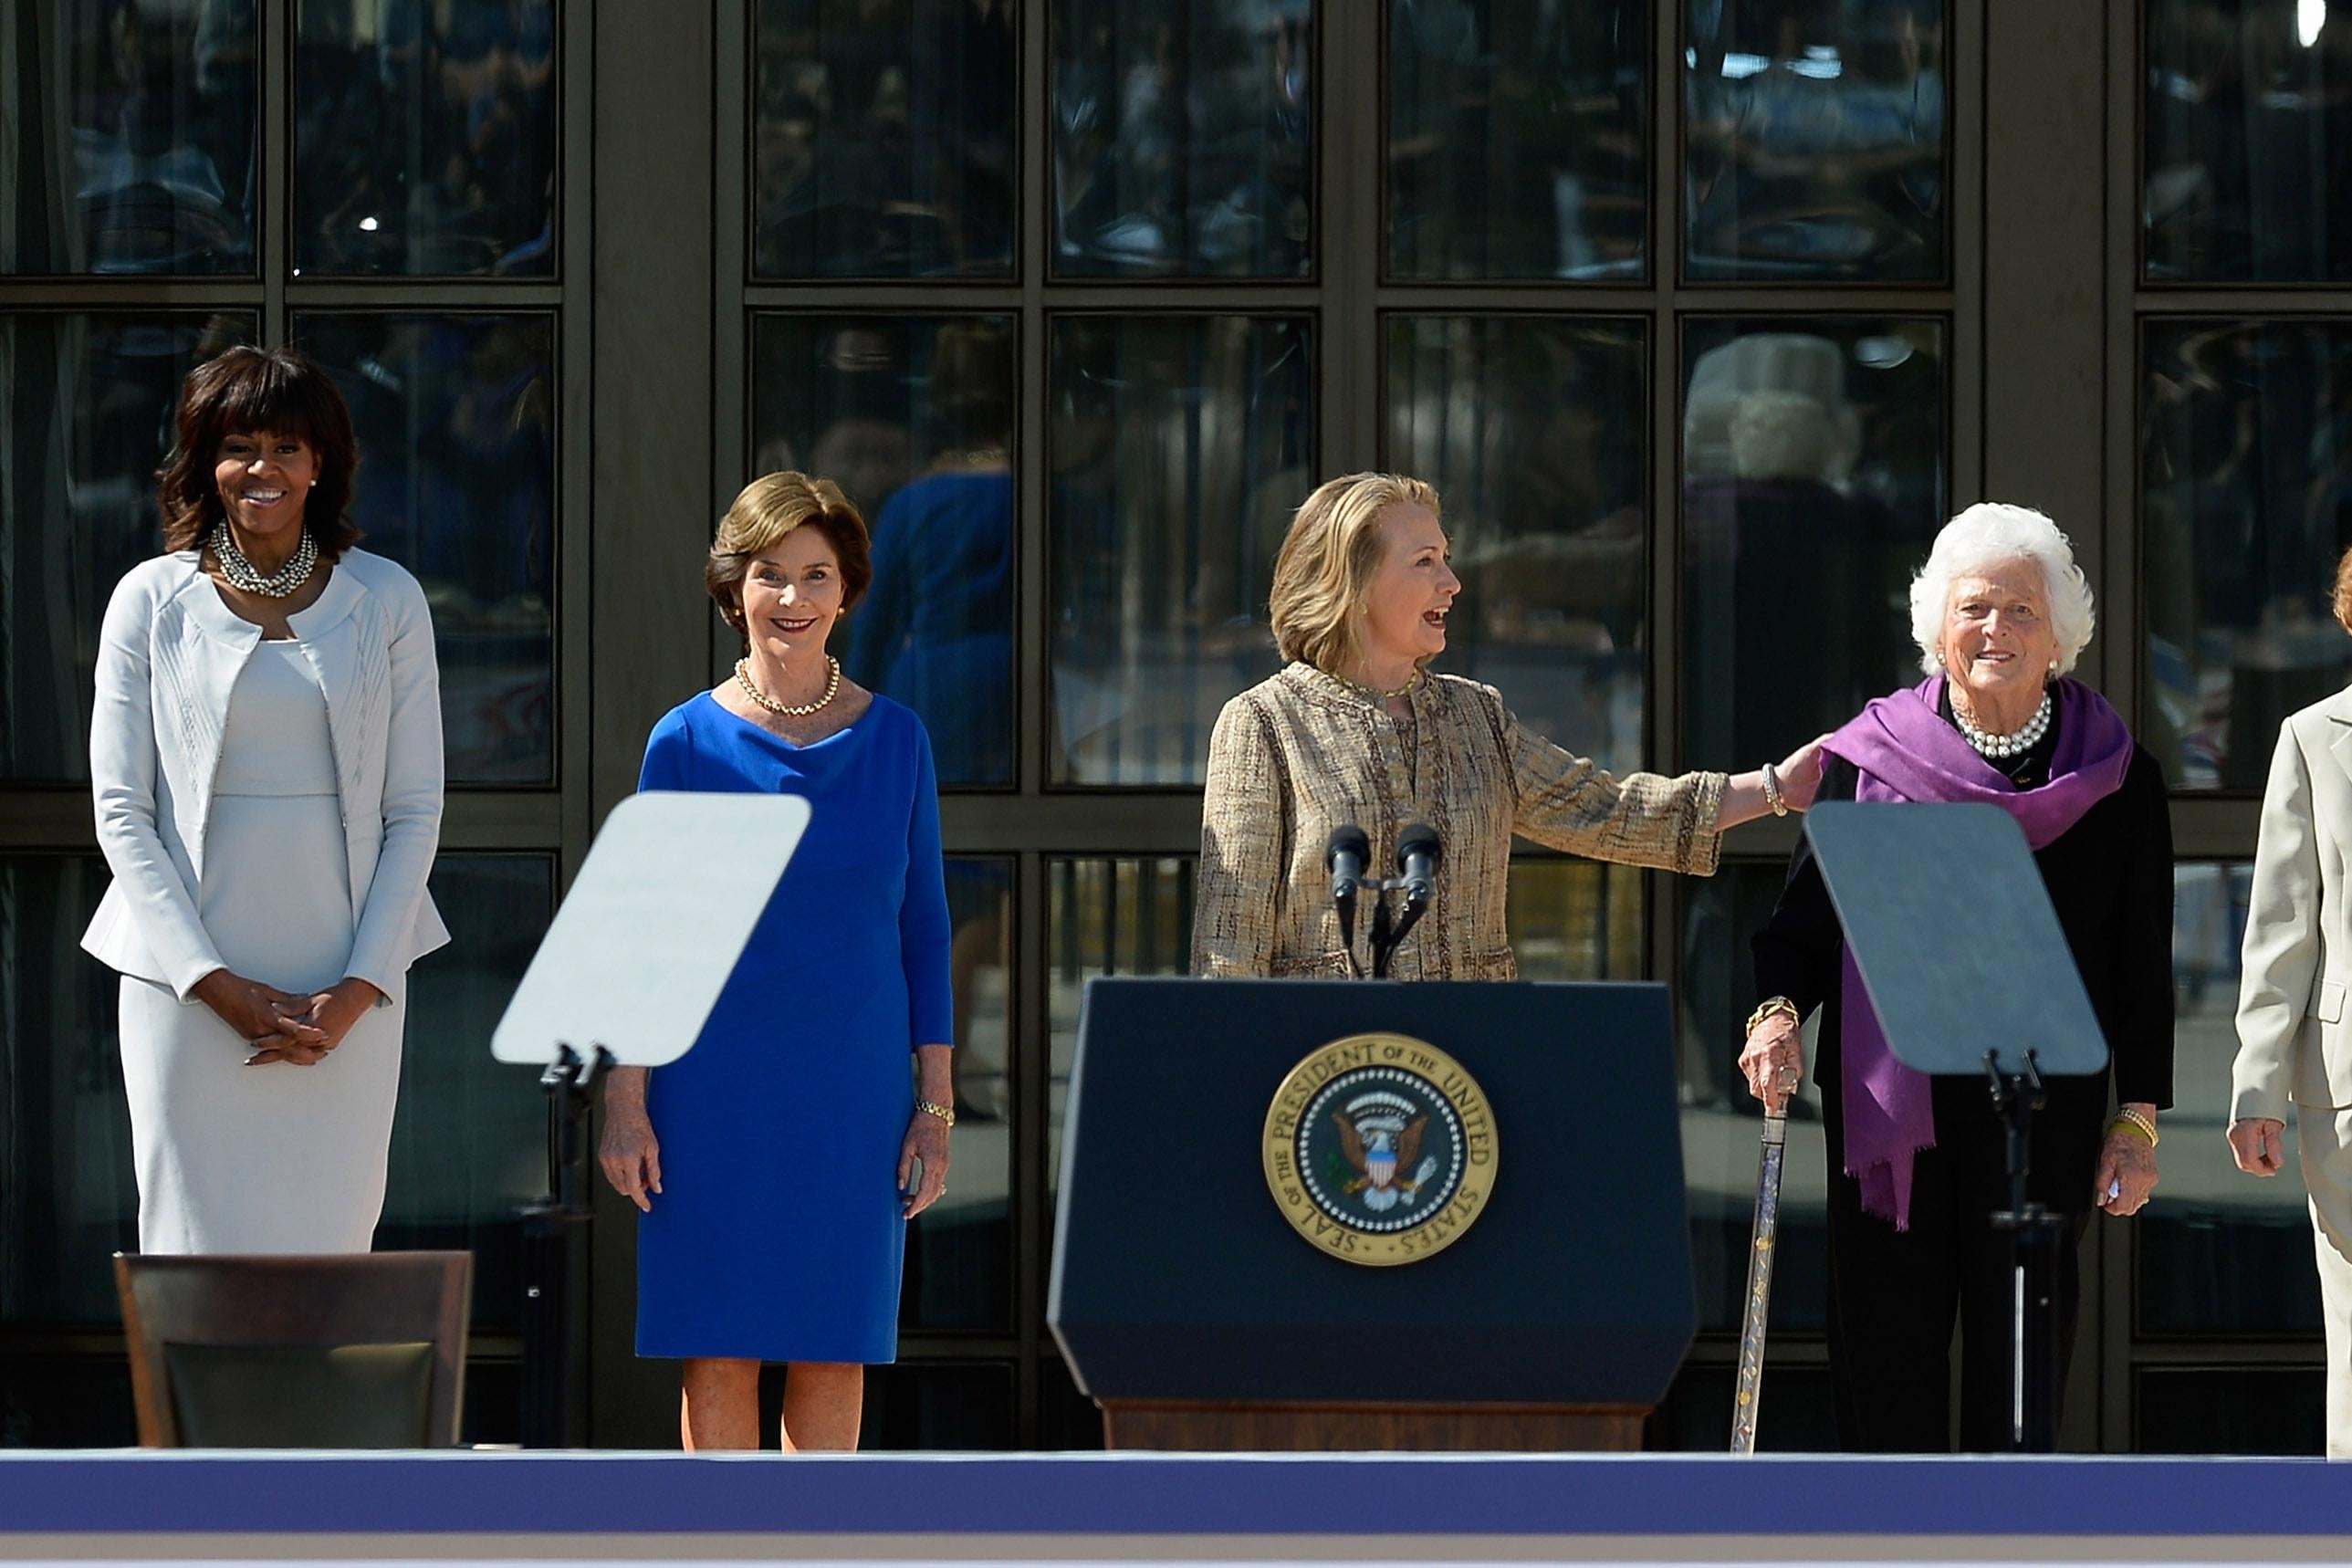 DALLAS, TX - APRIL 25: (L-R) First lady Michelle Obama, former first lady Laura Bush, former first lady Hillary Clinton, former first lady Barbara Bush and former first lady Rosalynn Carter are introduced during the opening ceremony of the George W. Bush Presidential Center April 25, 2013 in Dallas, Texas. The Bush library, which is located on the campus of Southern Methodist University, with more than 70 million pages of paper records, 43,000 artifacts, 200 million emails and four million digital photographs, will be opened to the public on May 1, 2013. The library is the 13th presidential library in the National Archives and Records Administration system.  (Photo by Kevork Djansezian/Getty Images)